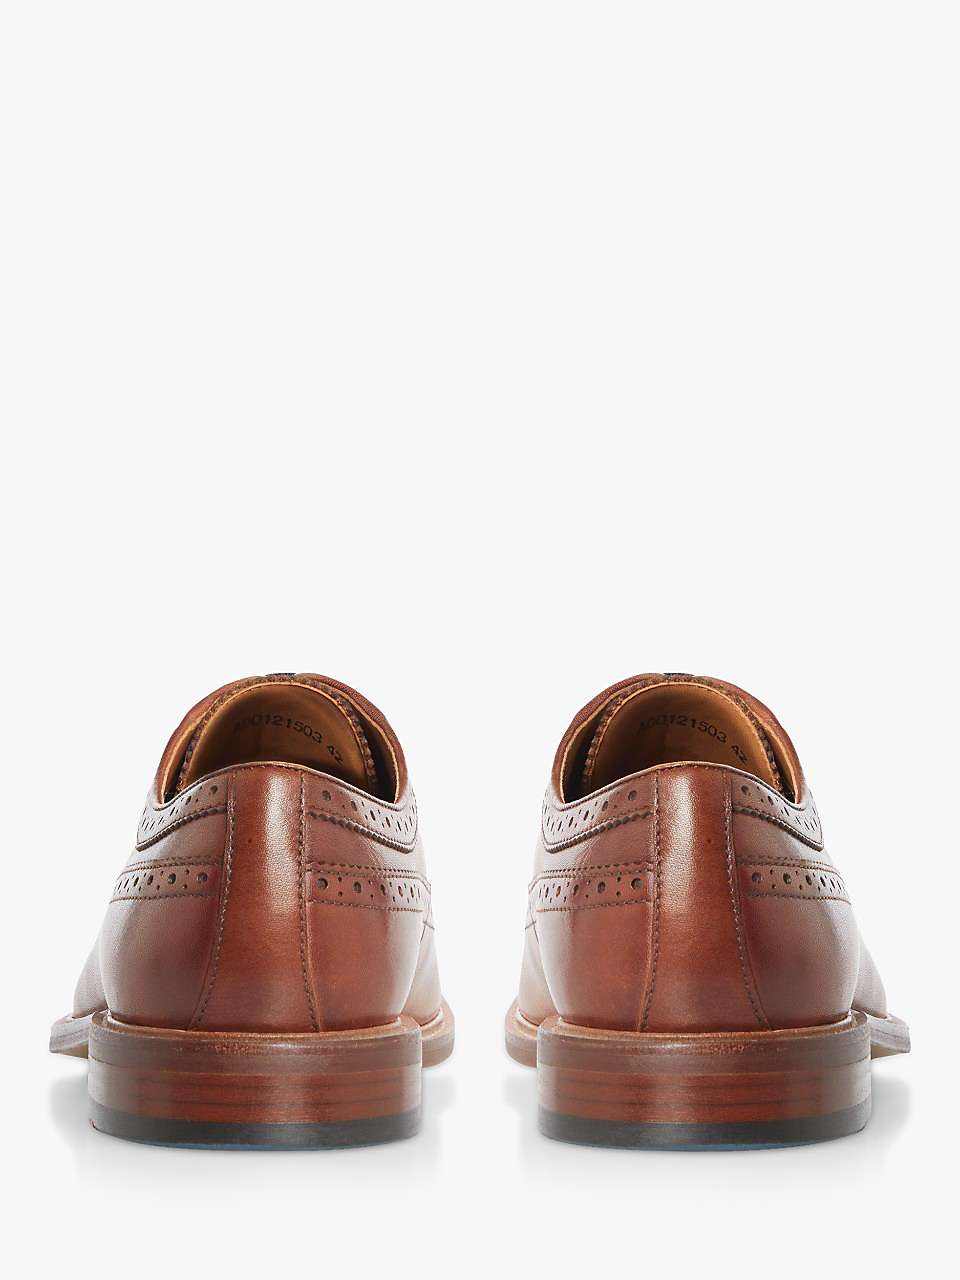 Buy Dune Superior Leather Wingtip Brogue Shoes Online at johnlewis.com